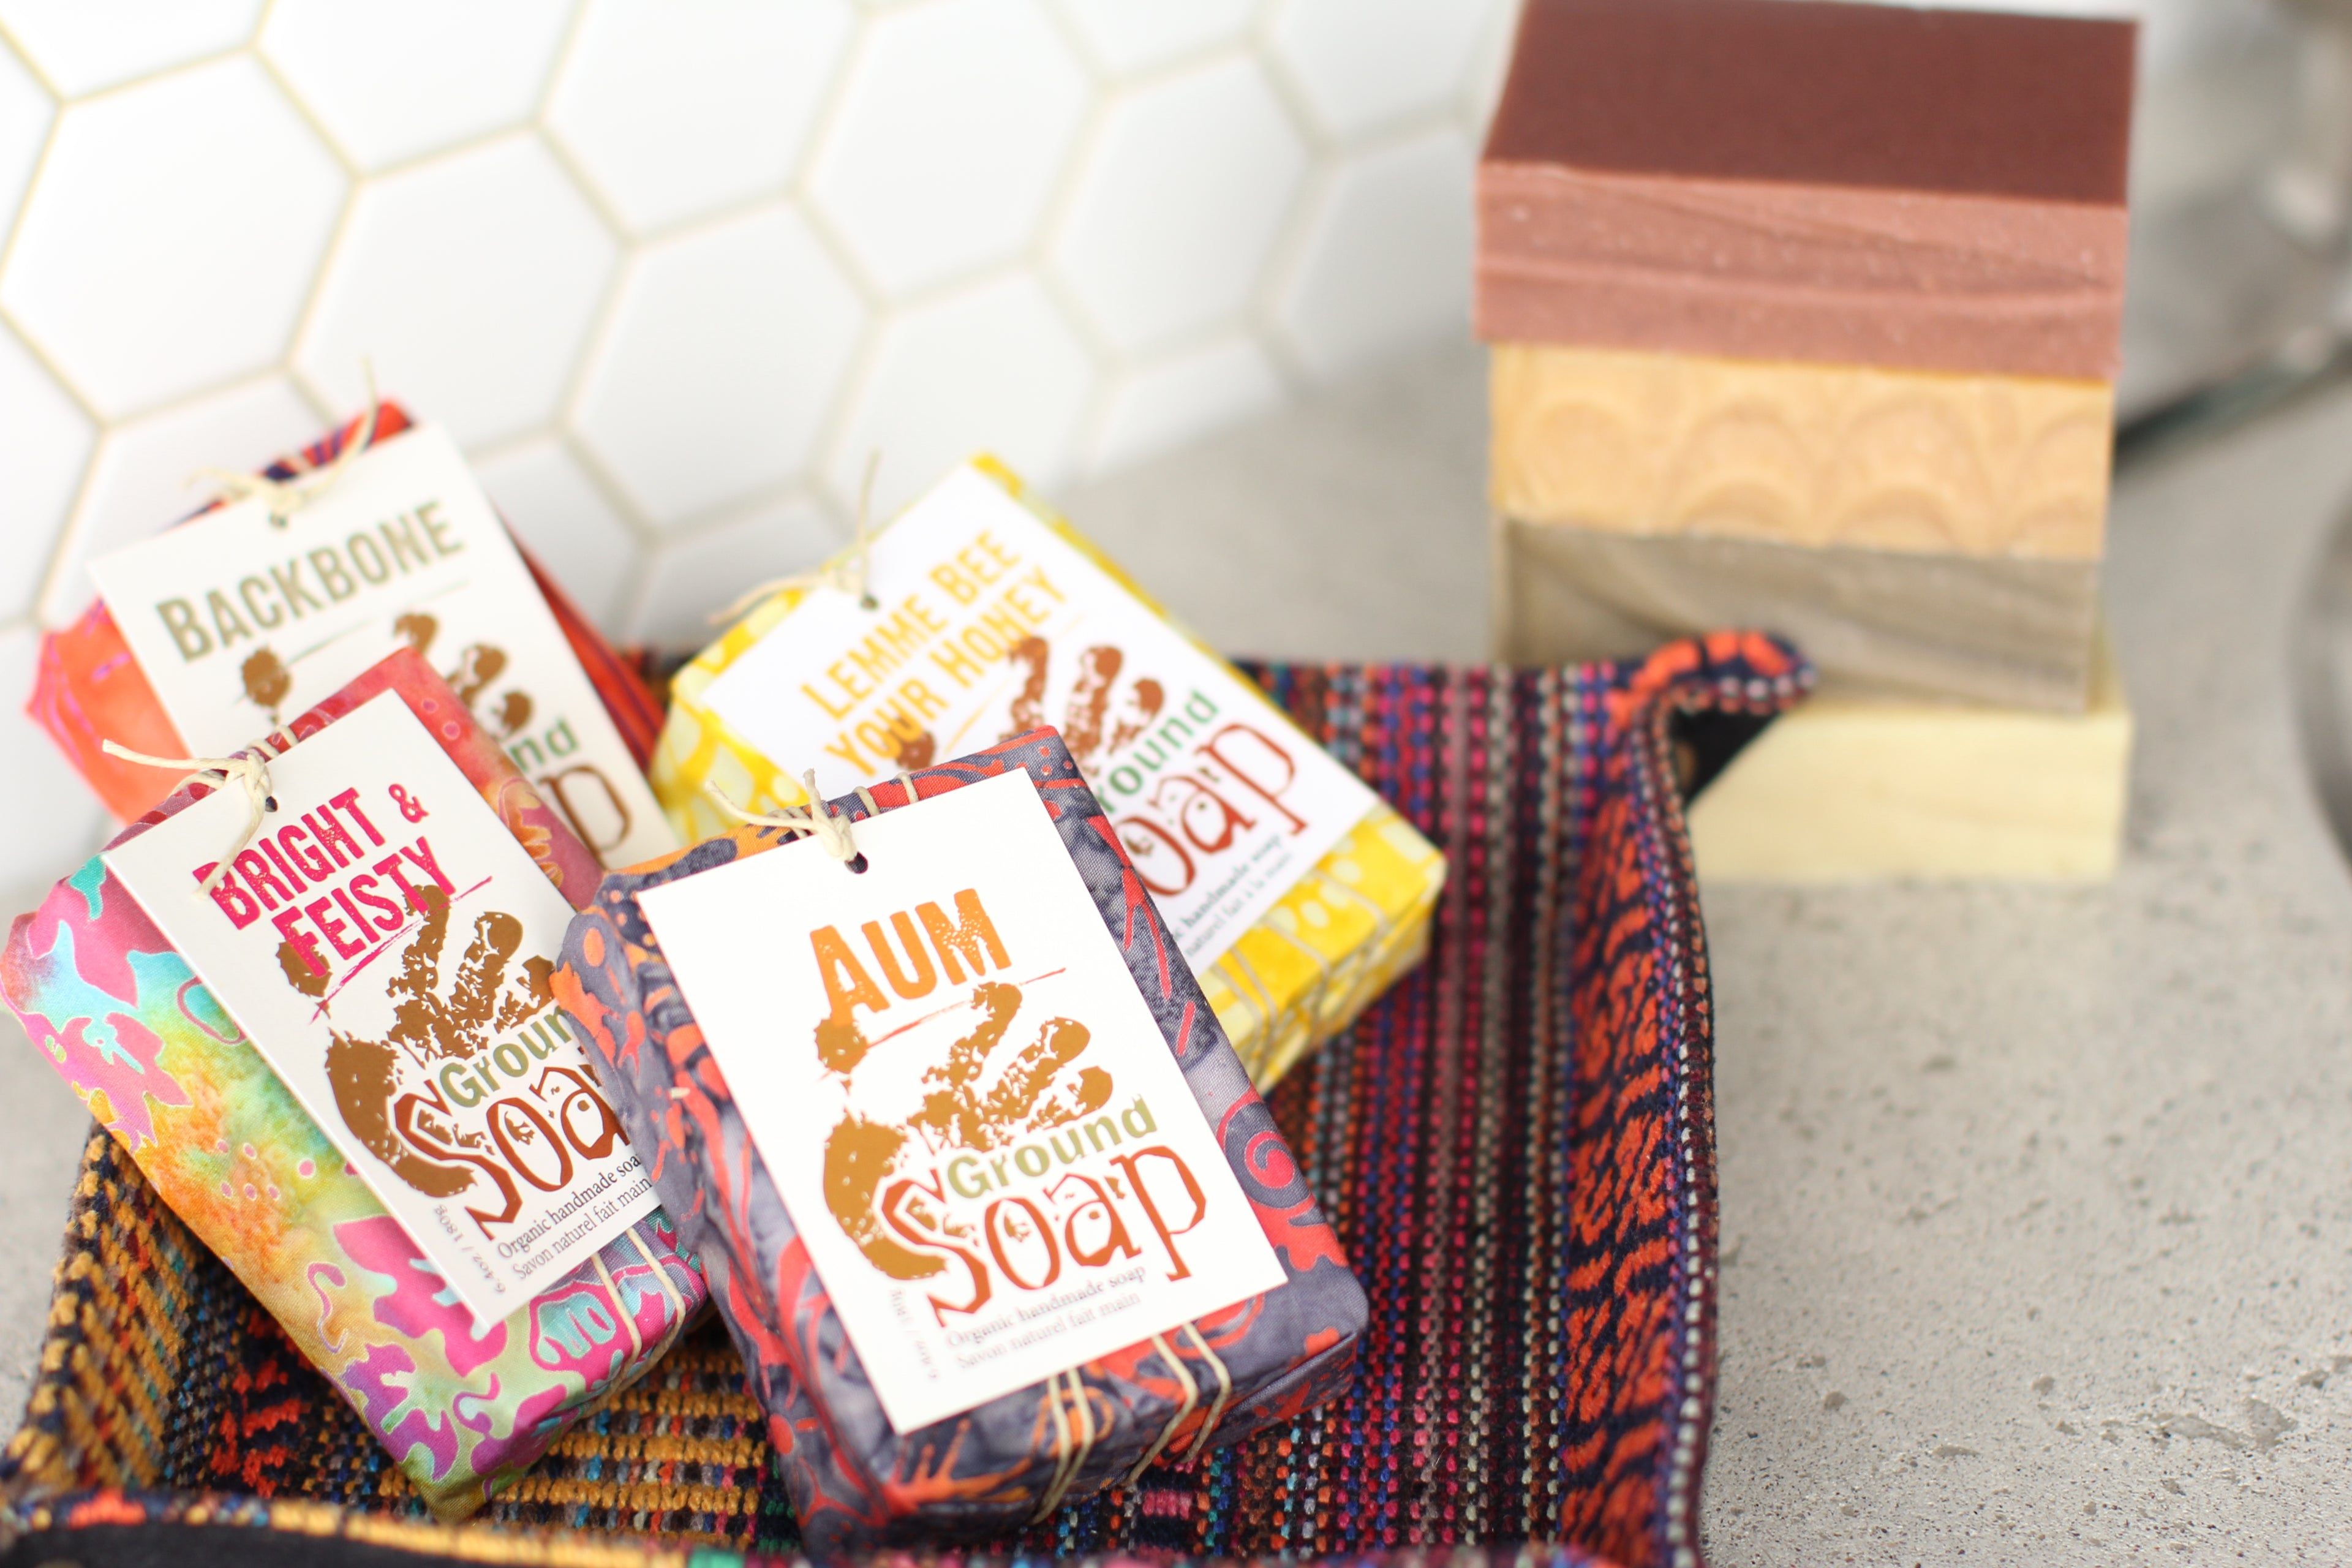 Four bars of Ground Soap: Aum, Bright & Feisty, Lemme Bee Your Honey, and Backbone